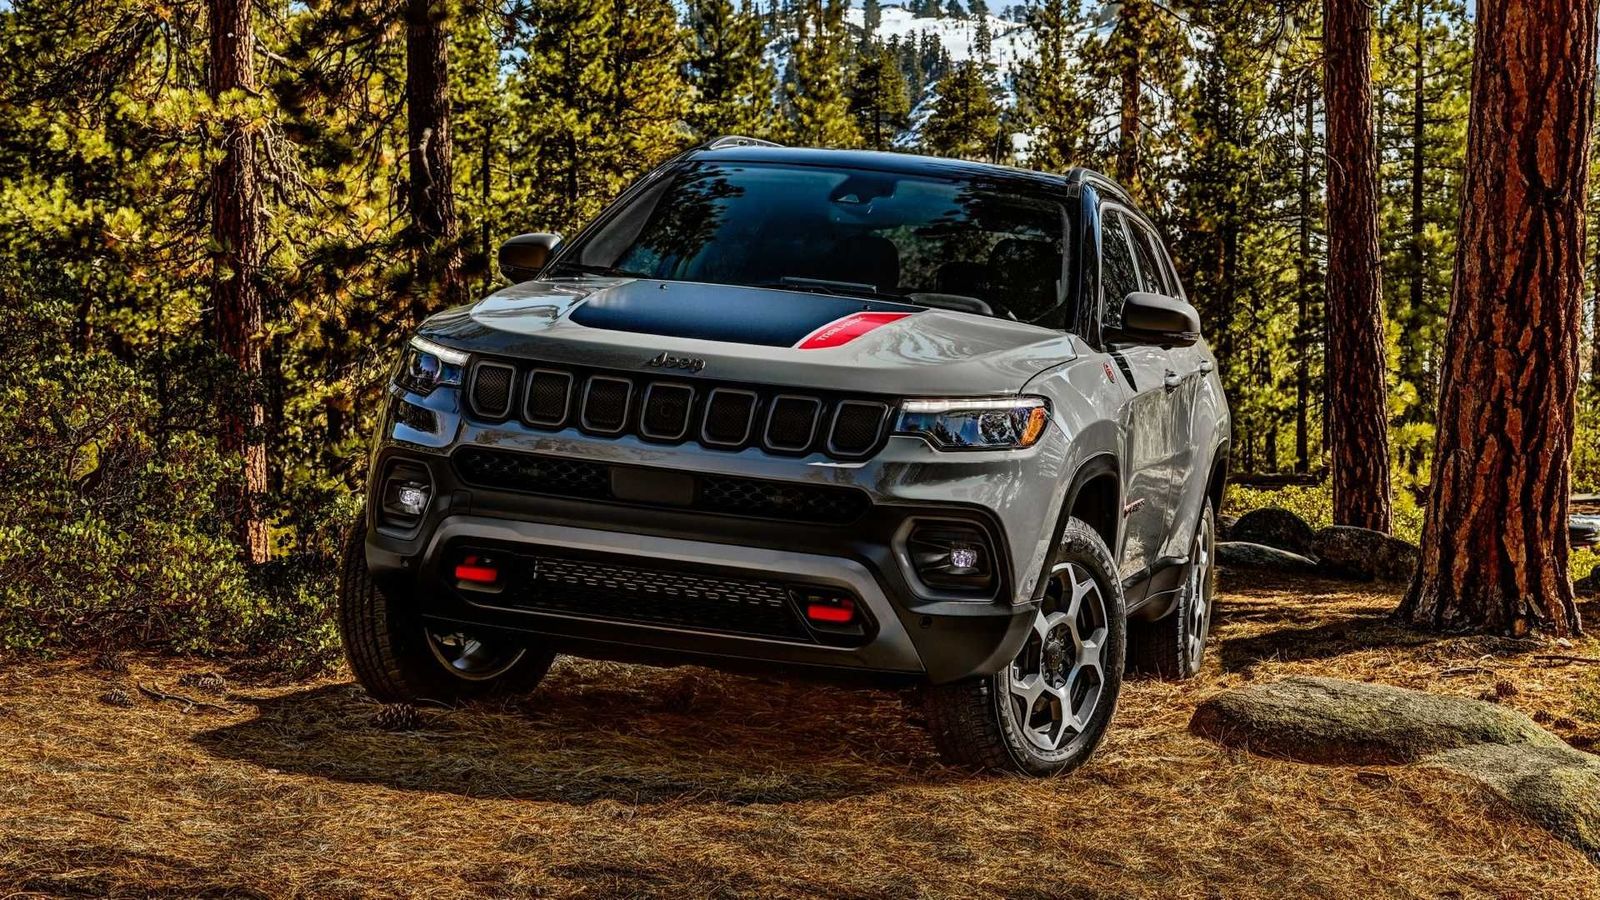 https://images.hindustantimes.com/auto/img/2021/07/14/1600x900/2022_Jeep_Compass_1626255538967_1626255543516.jpg